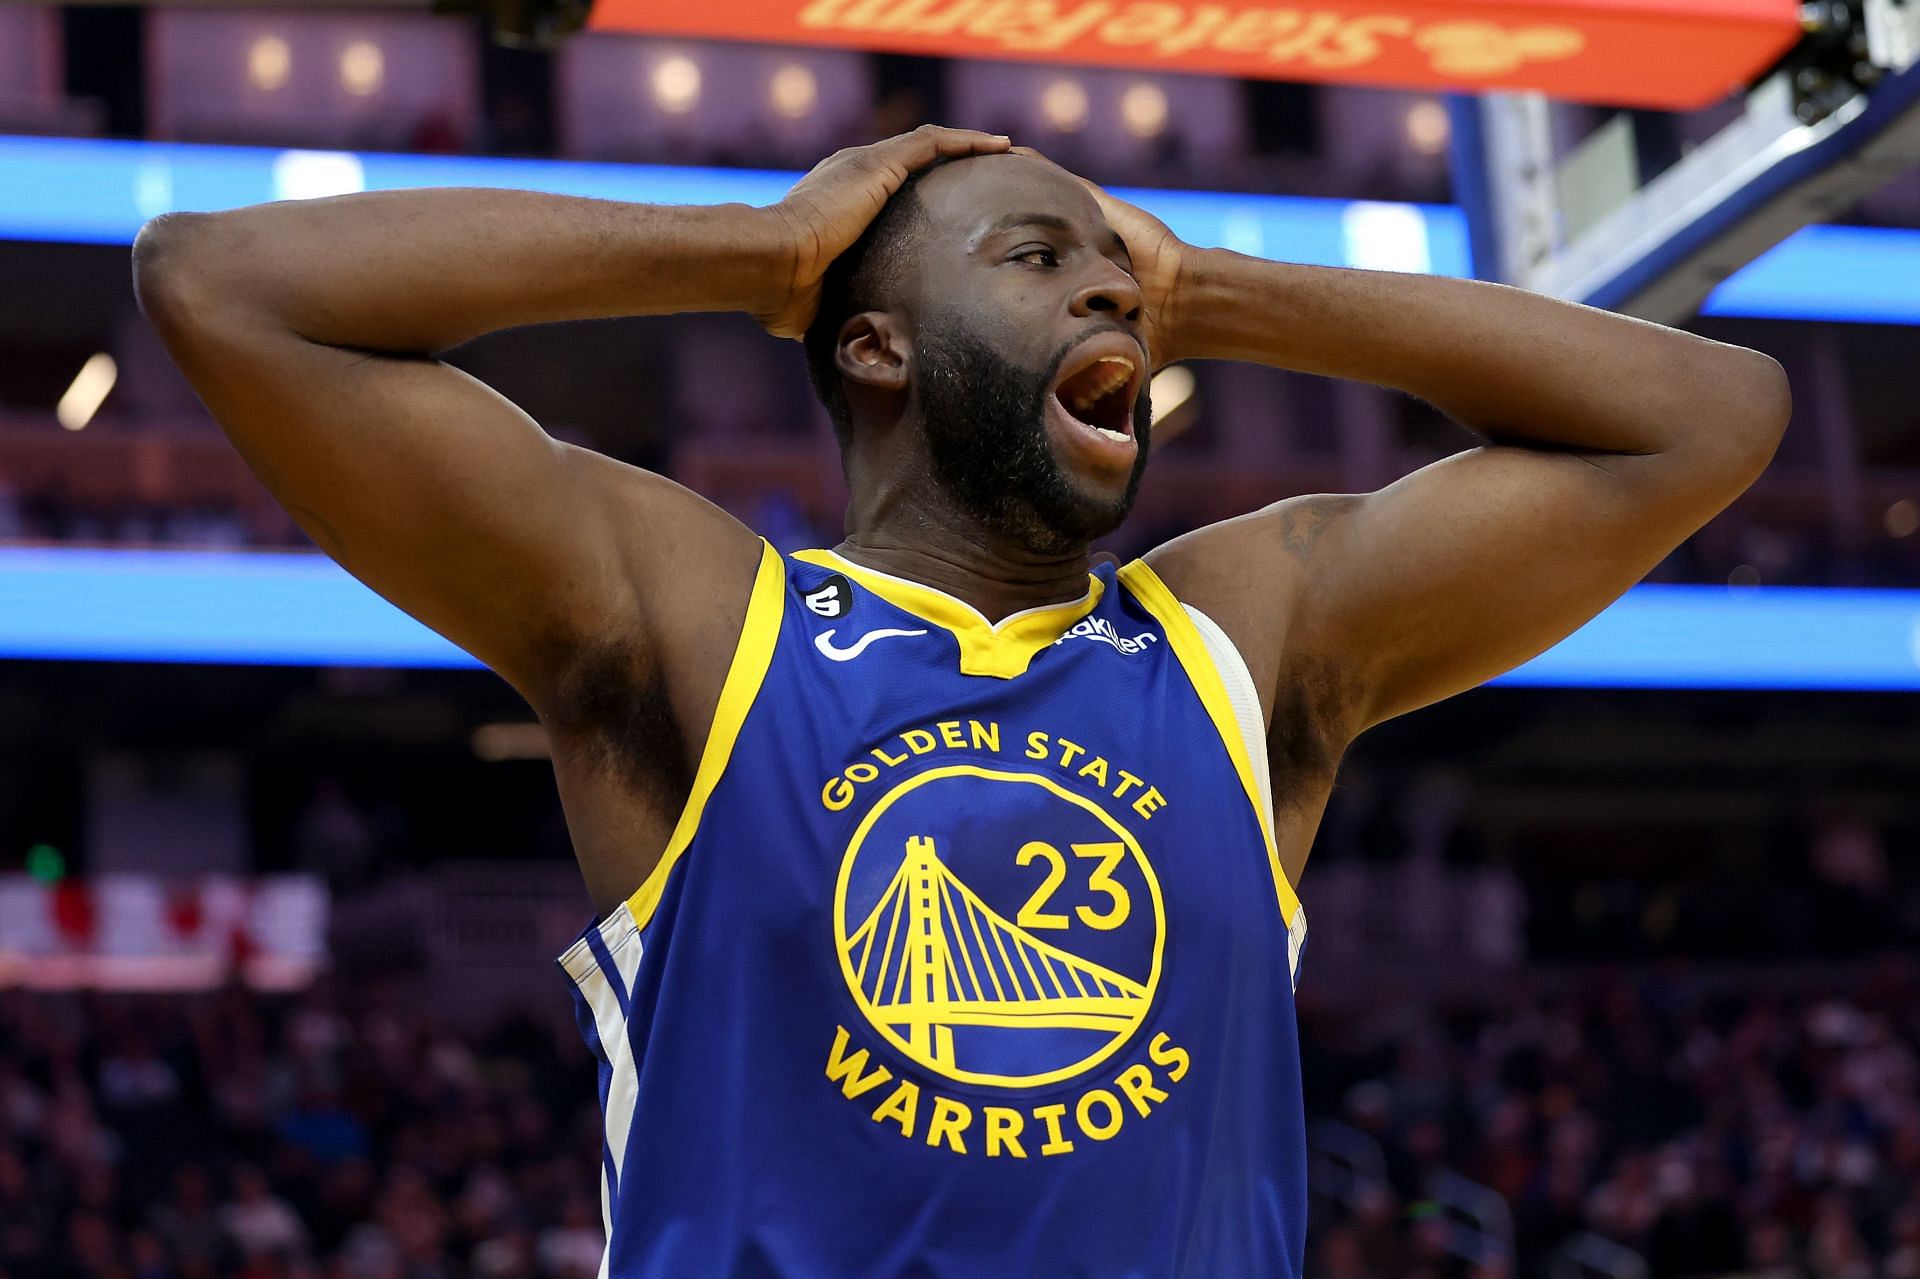 Golden State Warriors will be without veteran forward Draymond Green for their next game